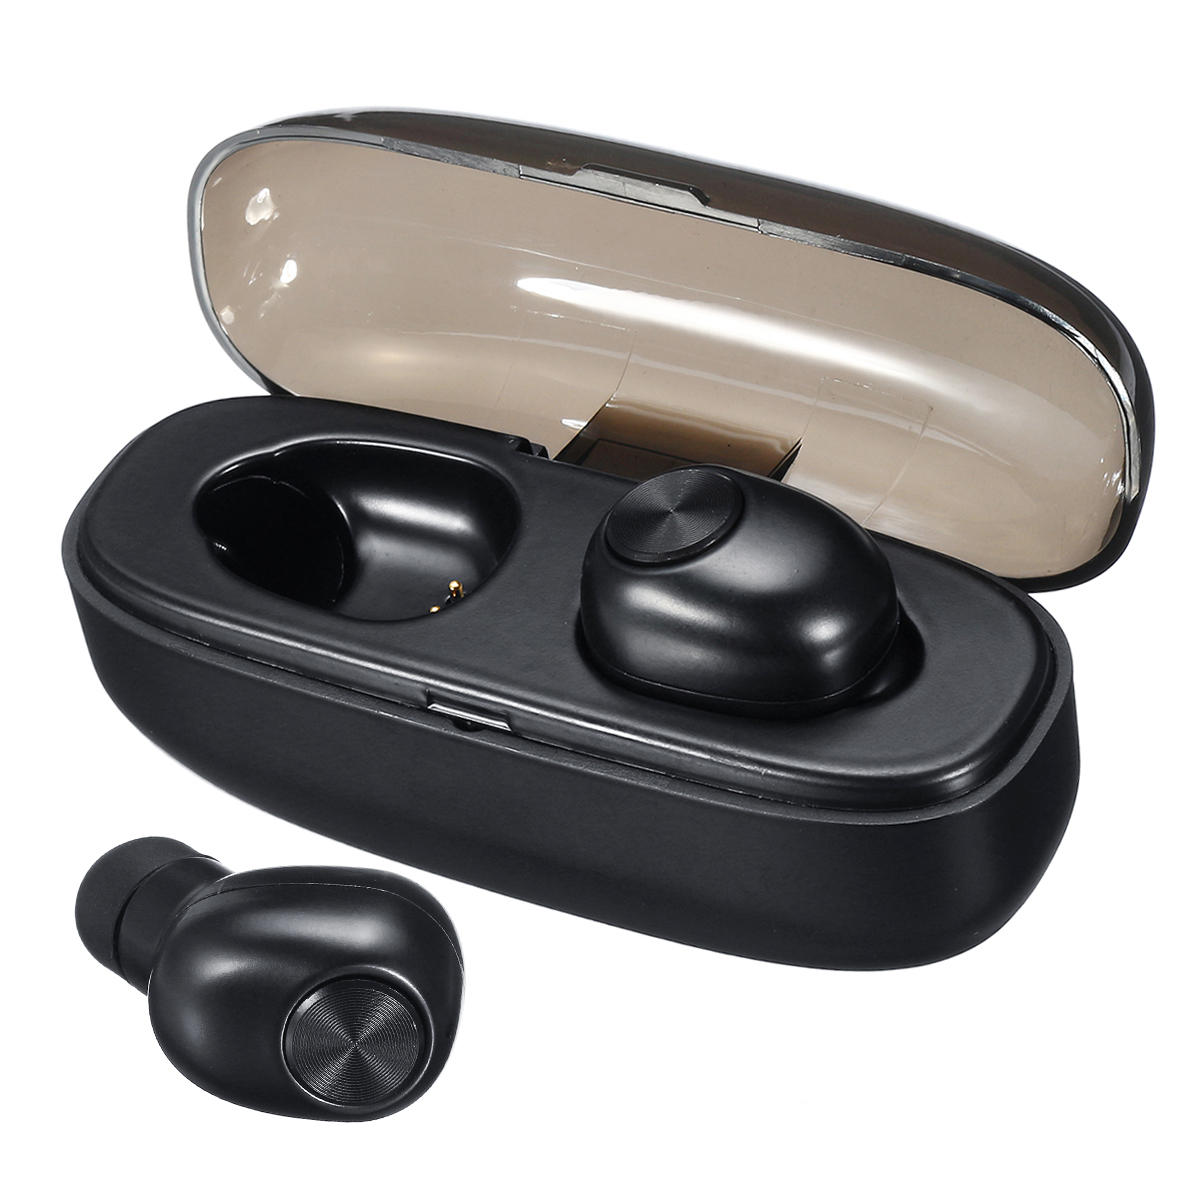 [bluetooth 5.0] TWS Wireless Earbuds Noise Cancelling Bilateral Calls IPX5 Waterproof Earphone with 